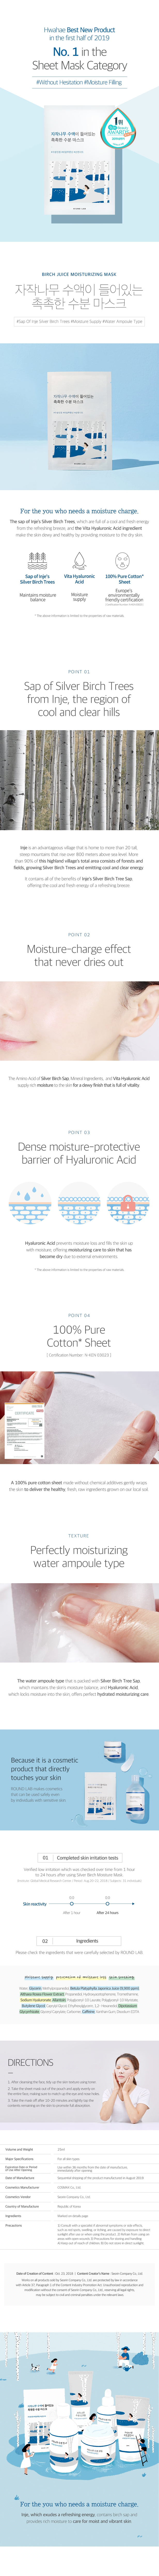 A moisturizing sheet mask that hydrates the dry skin with the refreshing moisture of Birch sap and Hyaluronic Acid. Amino Acid and minerals of birch sap adjust the moisture balance of the skin and Hyaluronic Acid keeps the skin moist. The 100% cotton sheet covers the skin smoothly, conveying the moist water ampoule healthily into the skin.